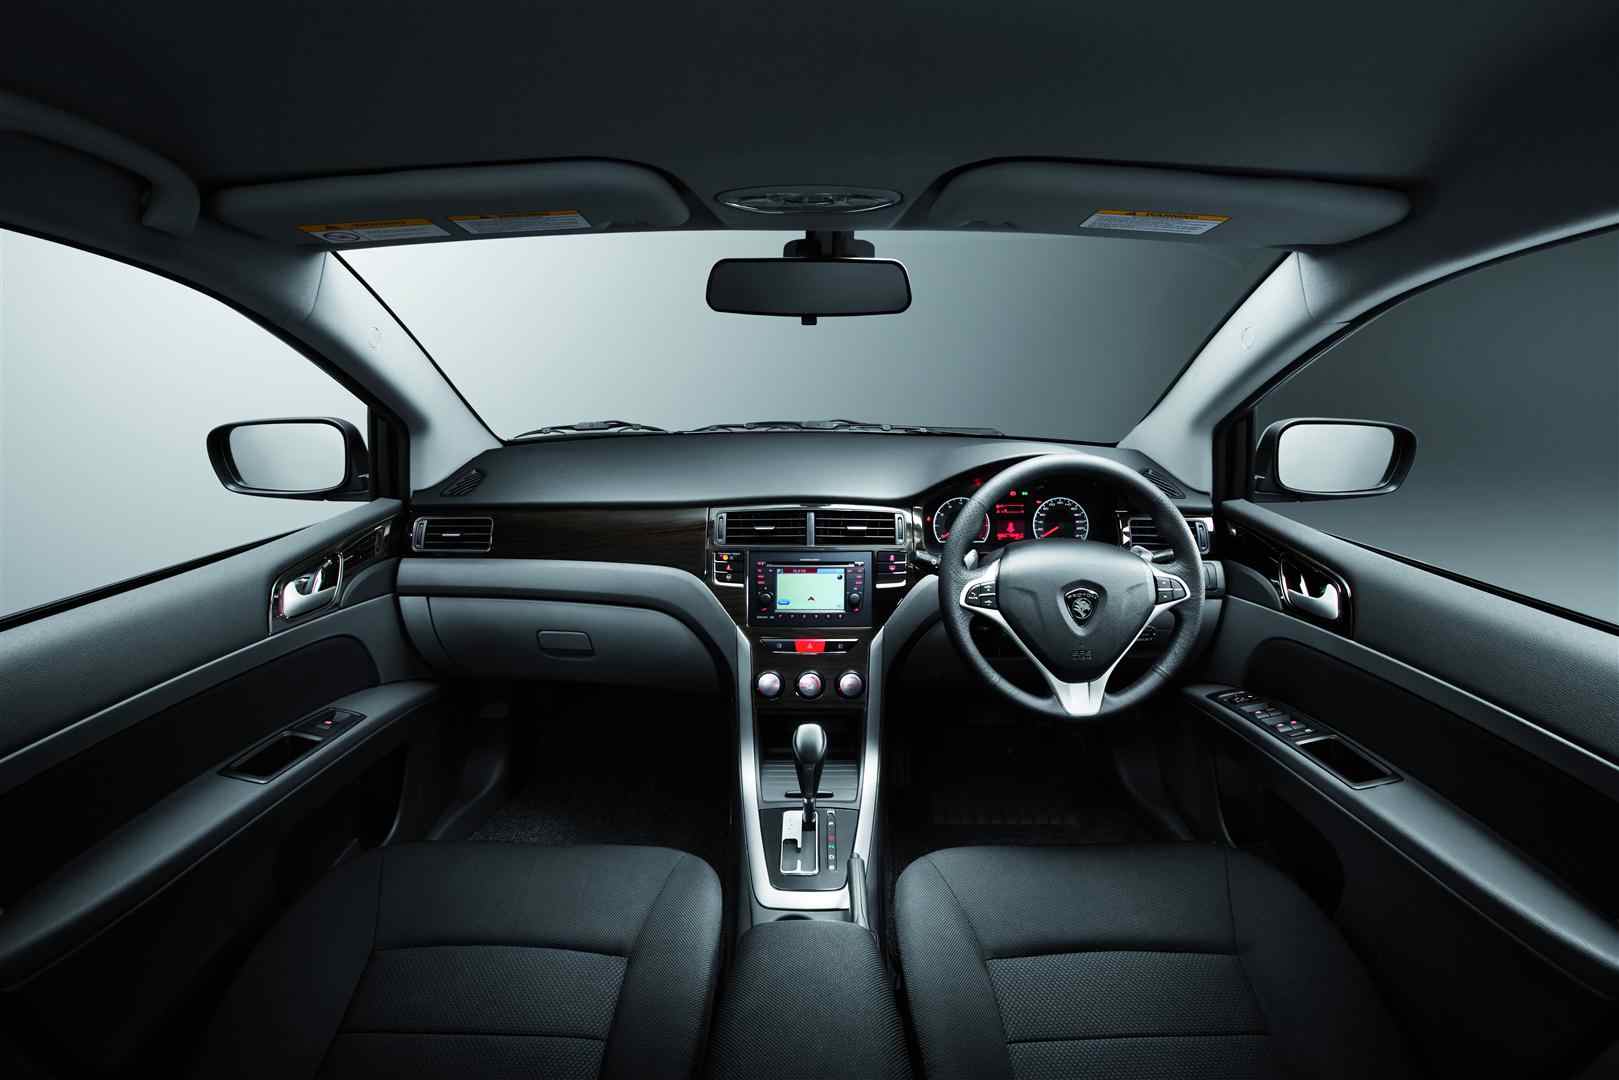 With a brand new Proton Preve Executive, a push start-button, an auto rain sensor feature and in-car internet access via Proton’s Yes 4G WiFi system means there will be lots of play time ahead for new Preve Executive owners.